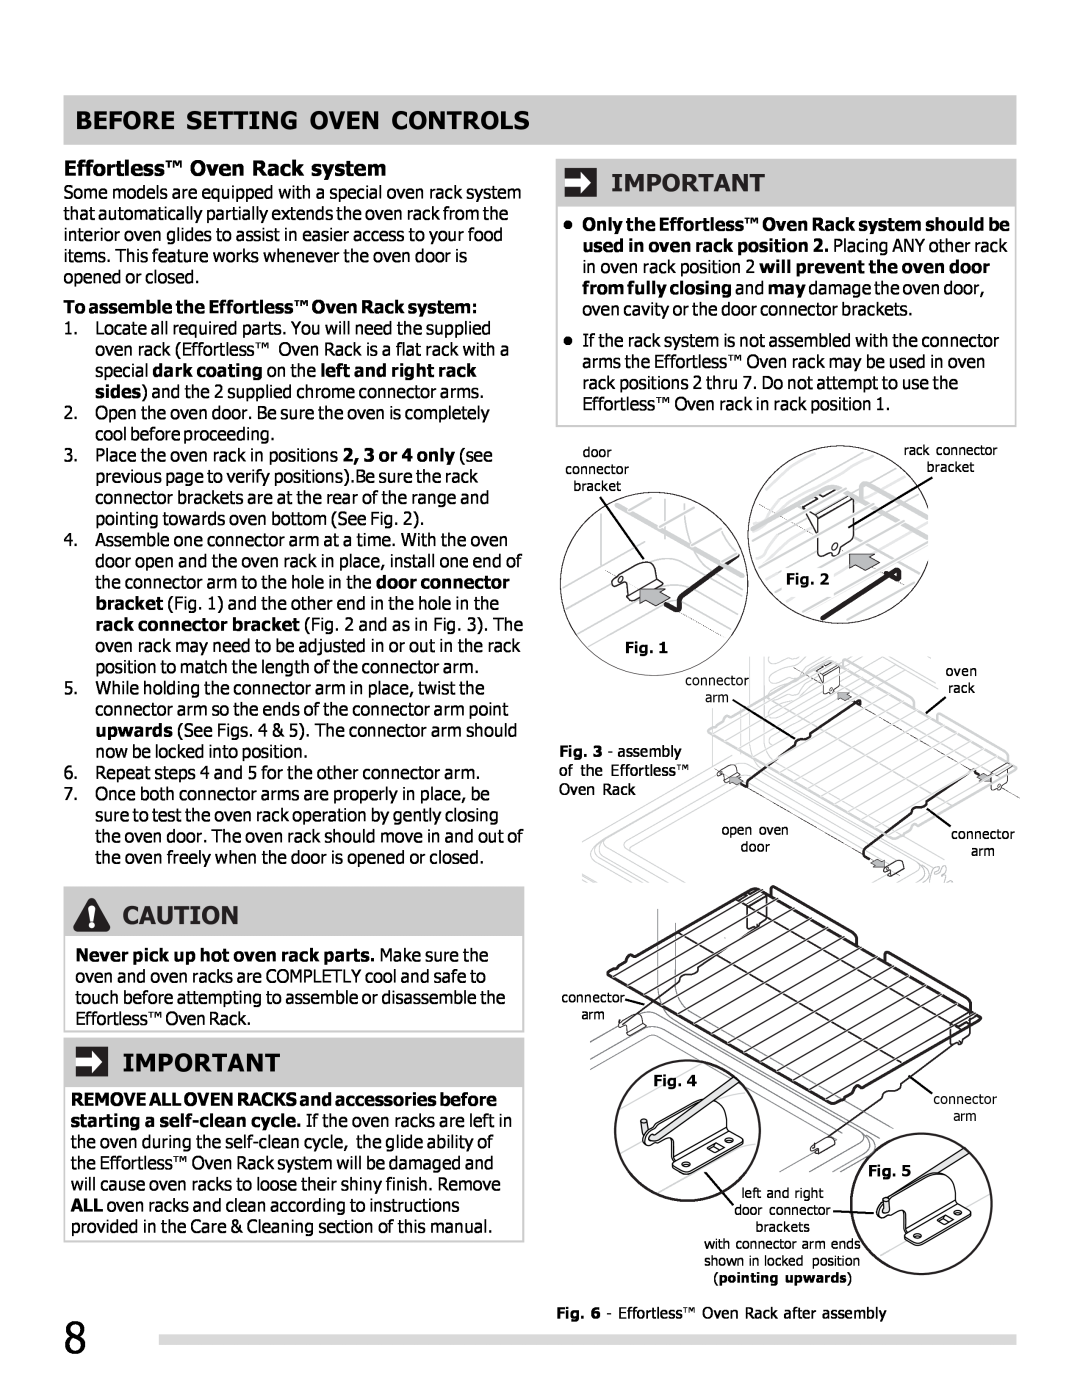 Frigidaire FGEF3030PF important safety instructions Effortless Oven Rack system, Before Setting Oven Controls 